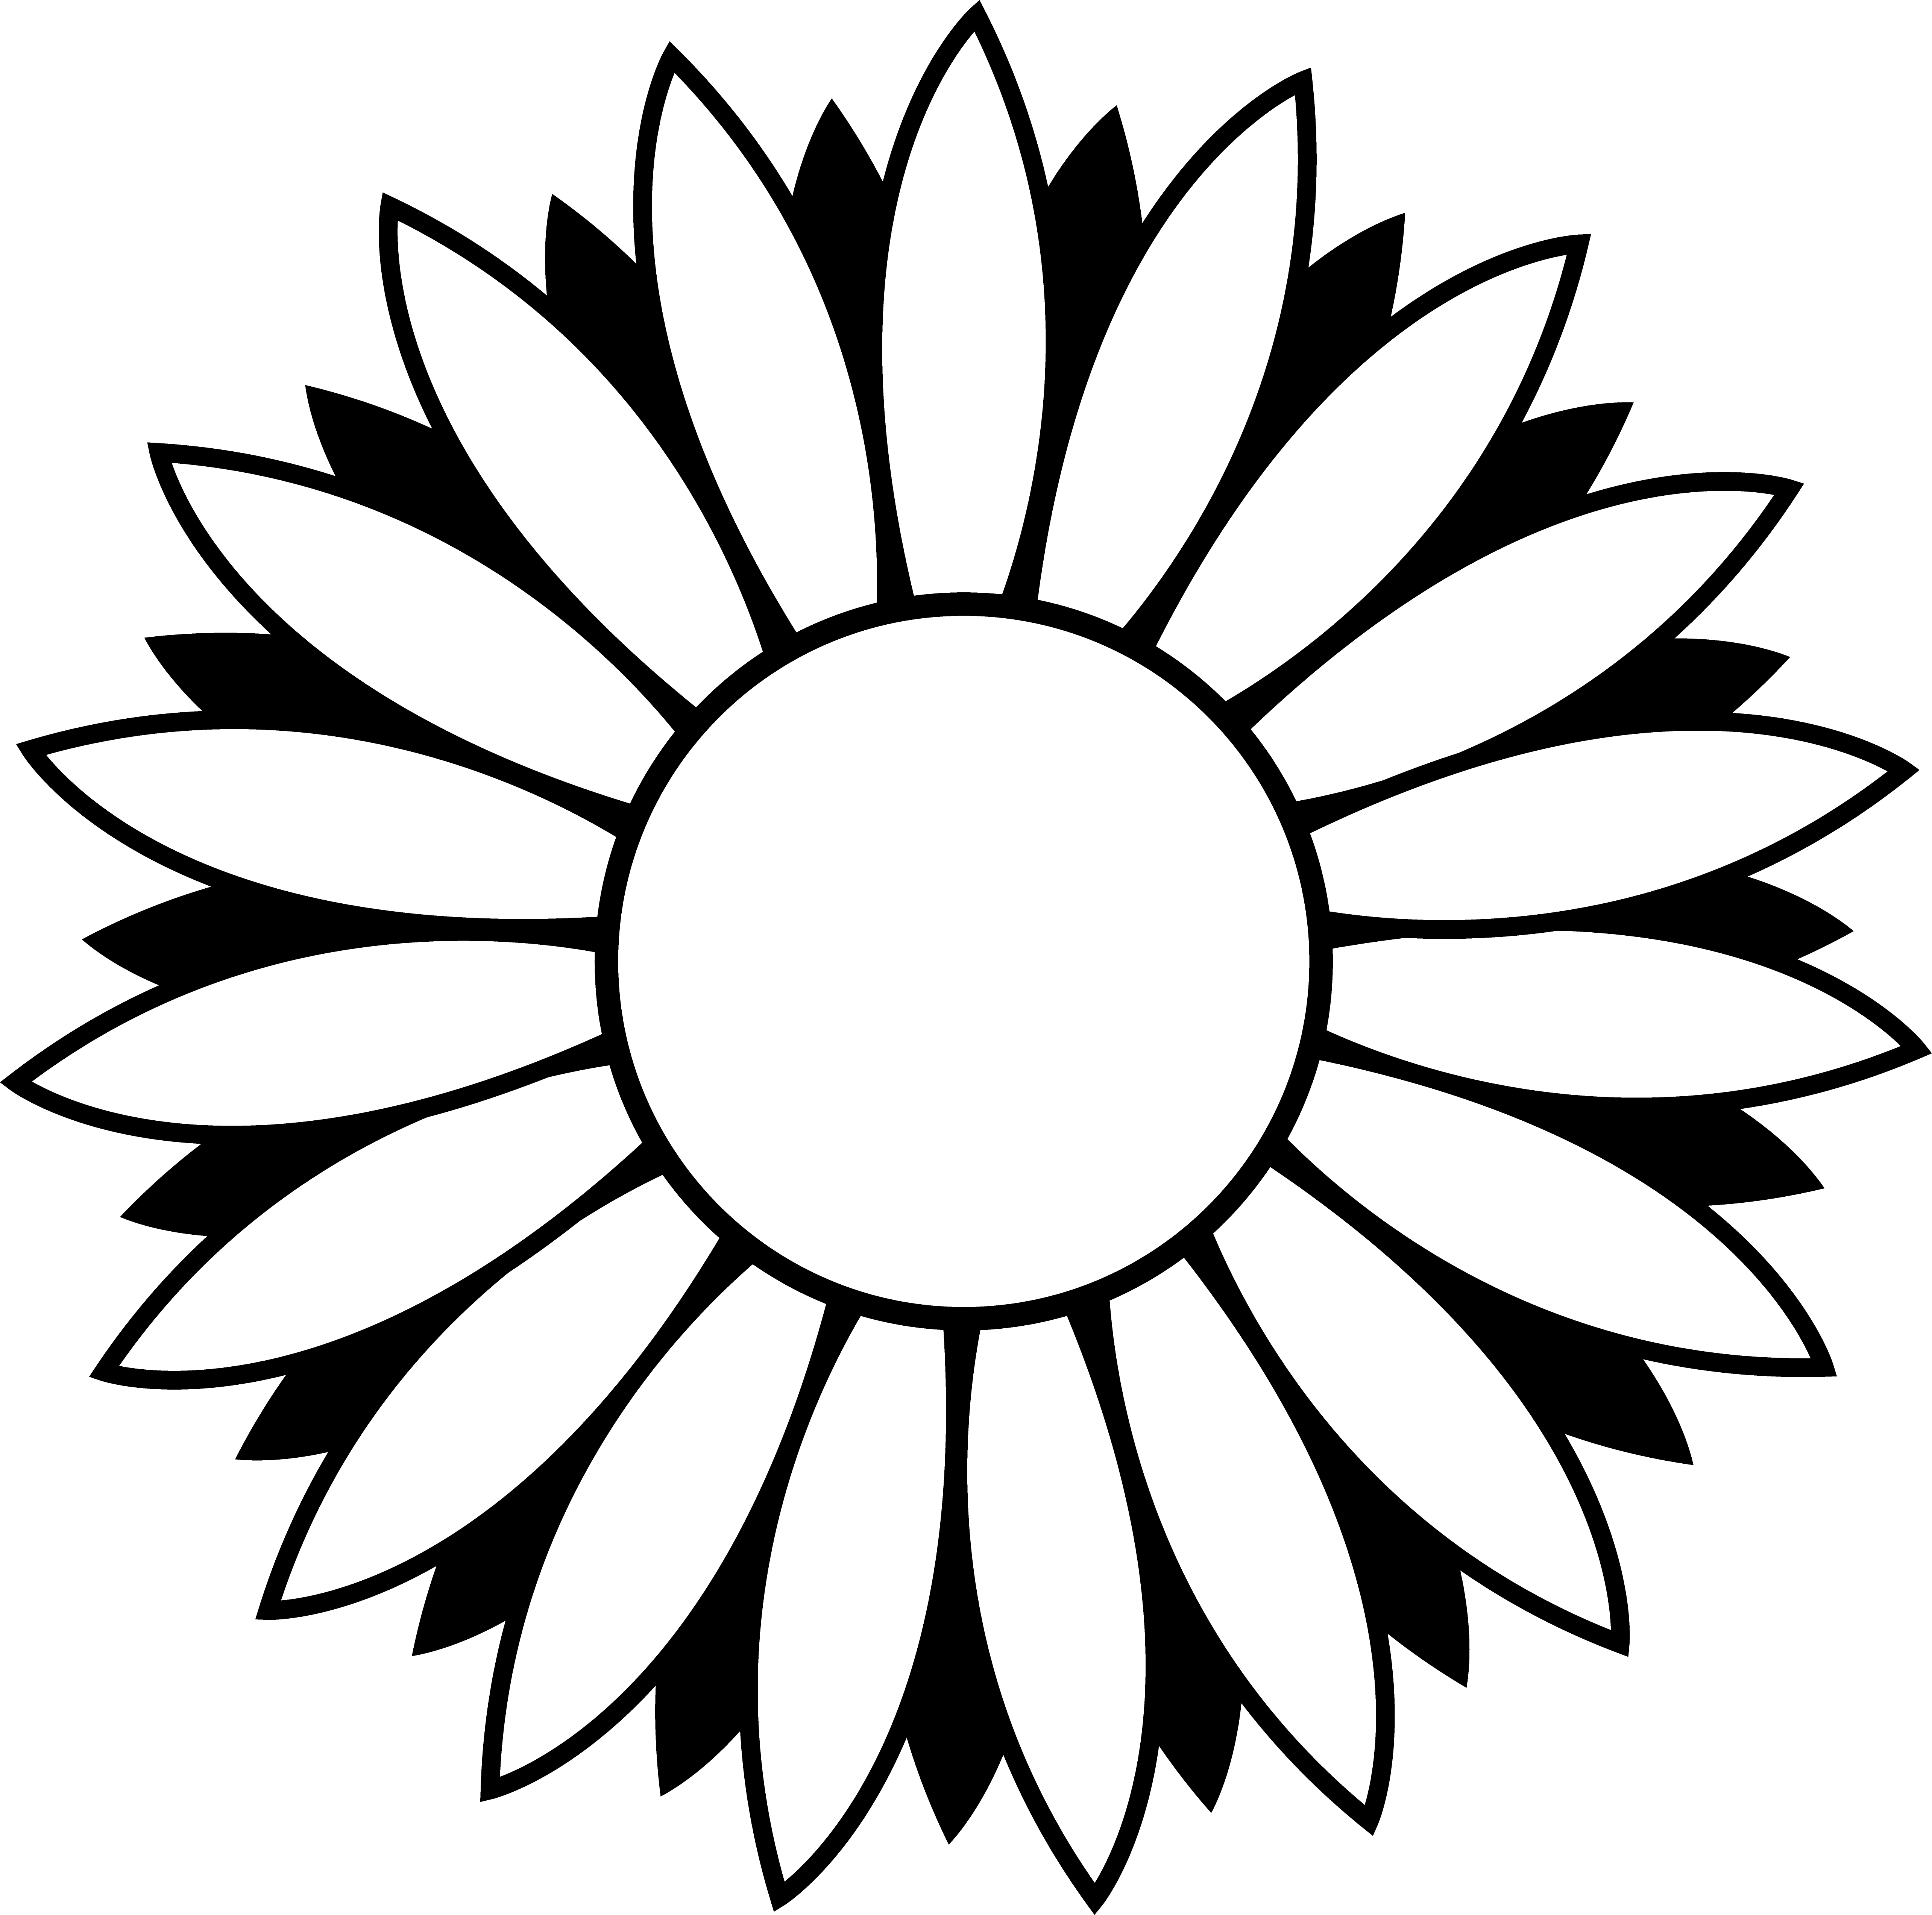 Free Black And White Cartoon Flowers Download Free Clip Art Free